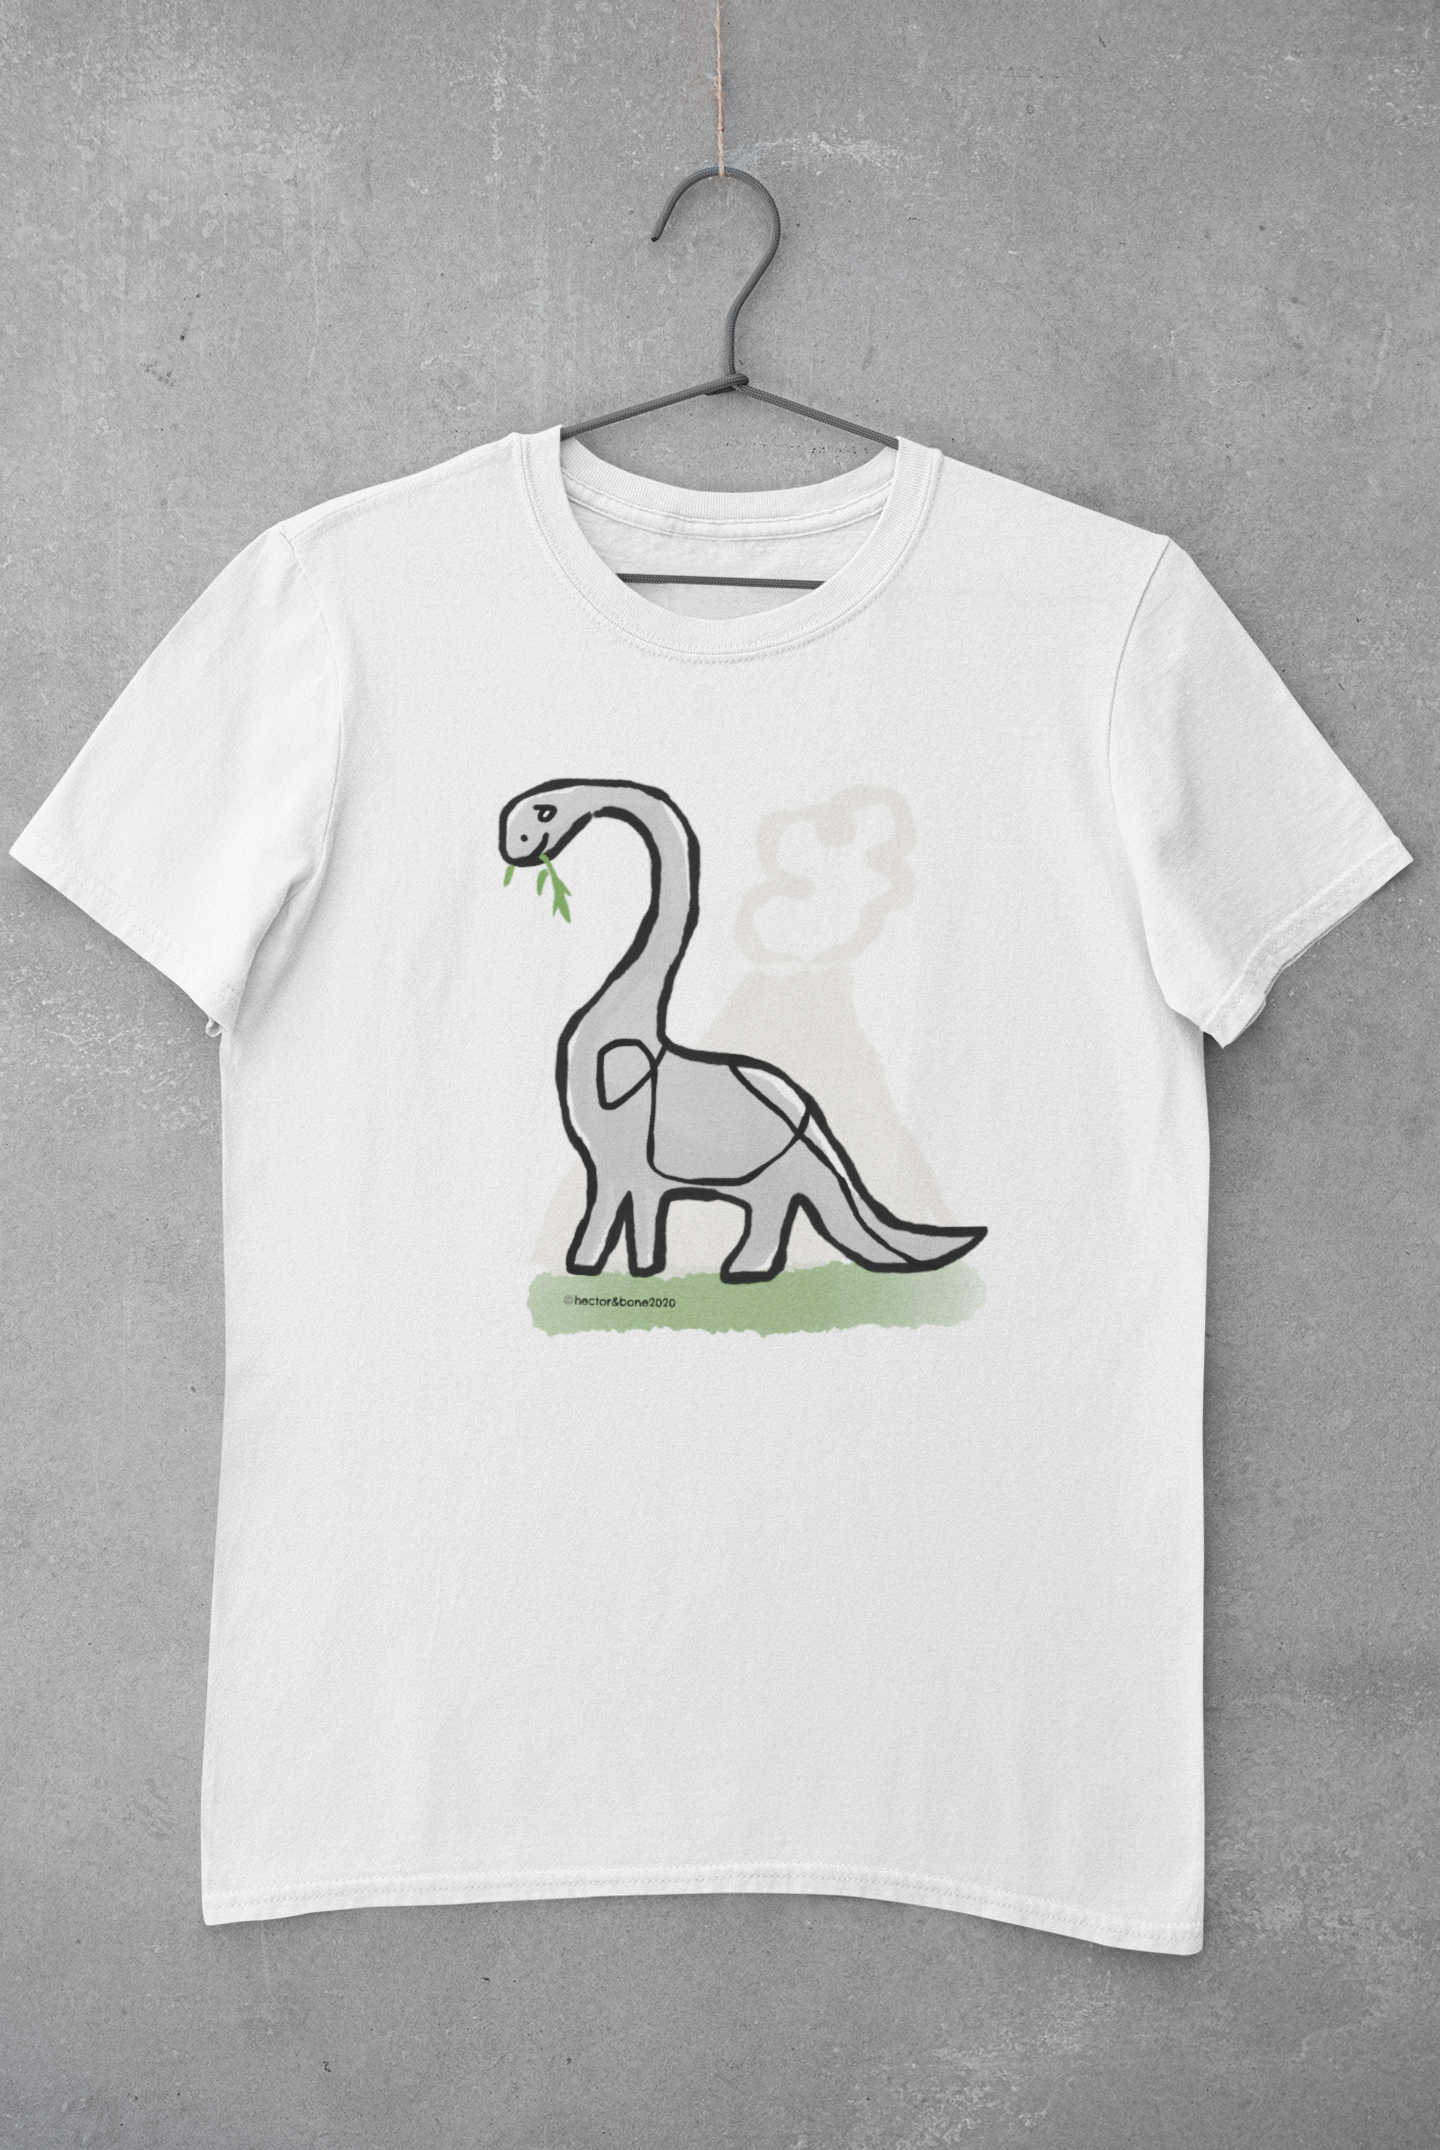 A cute derek dinosaur illustrated design by hector and bone on a white t-shirt